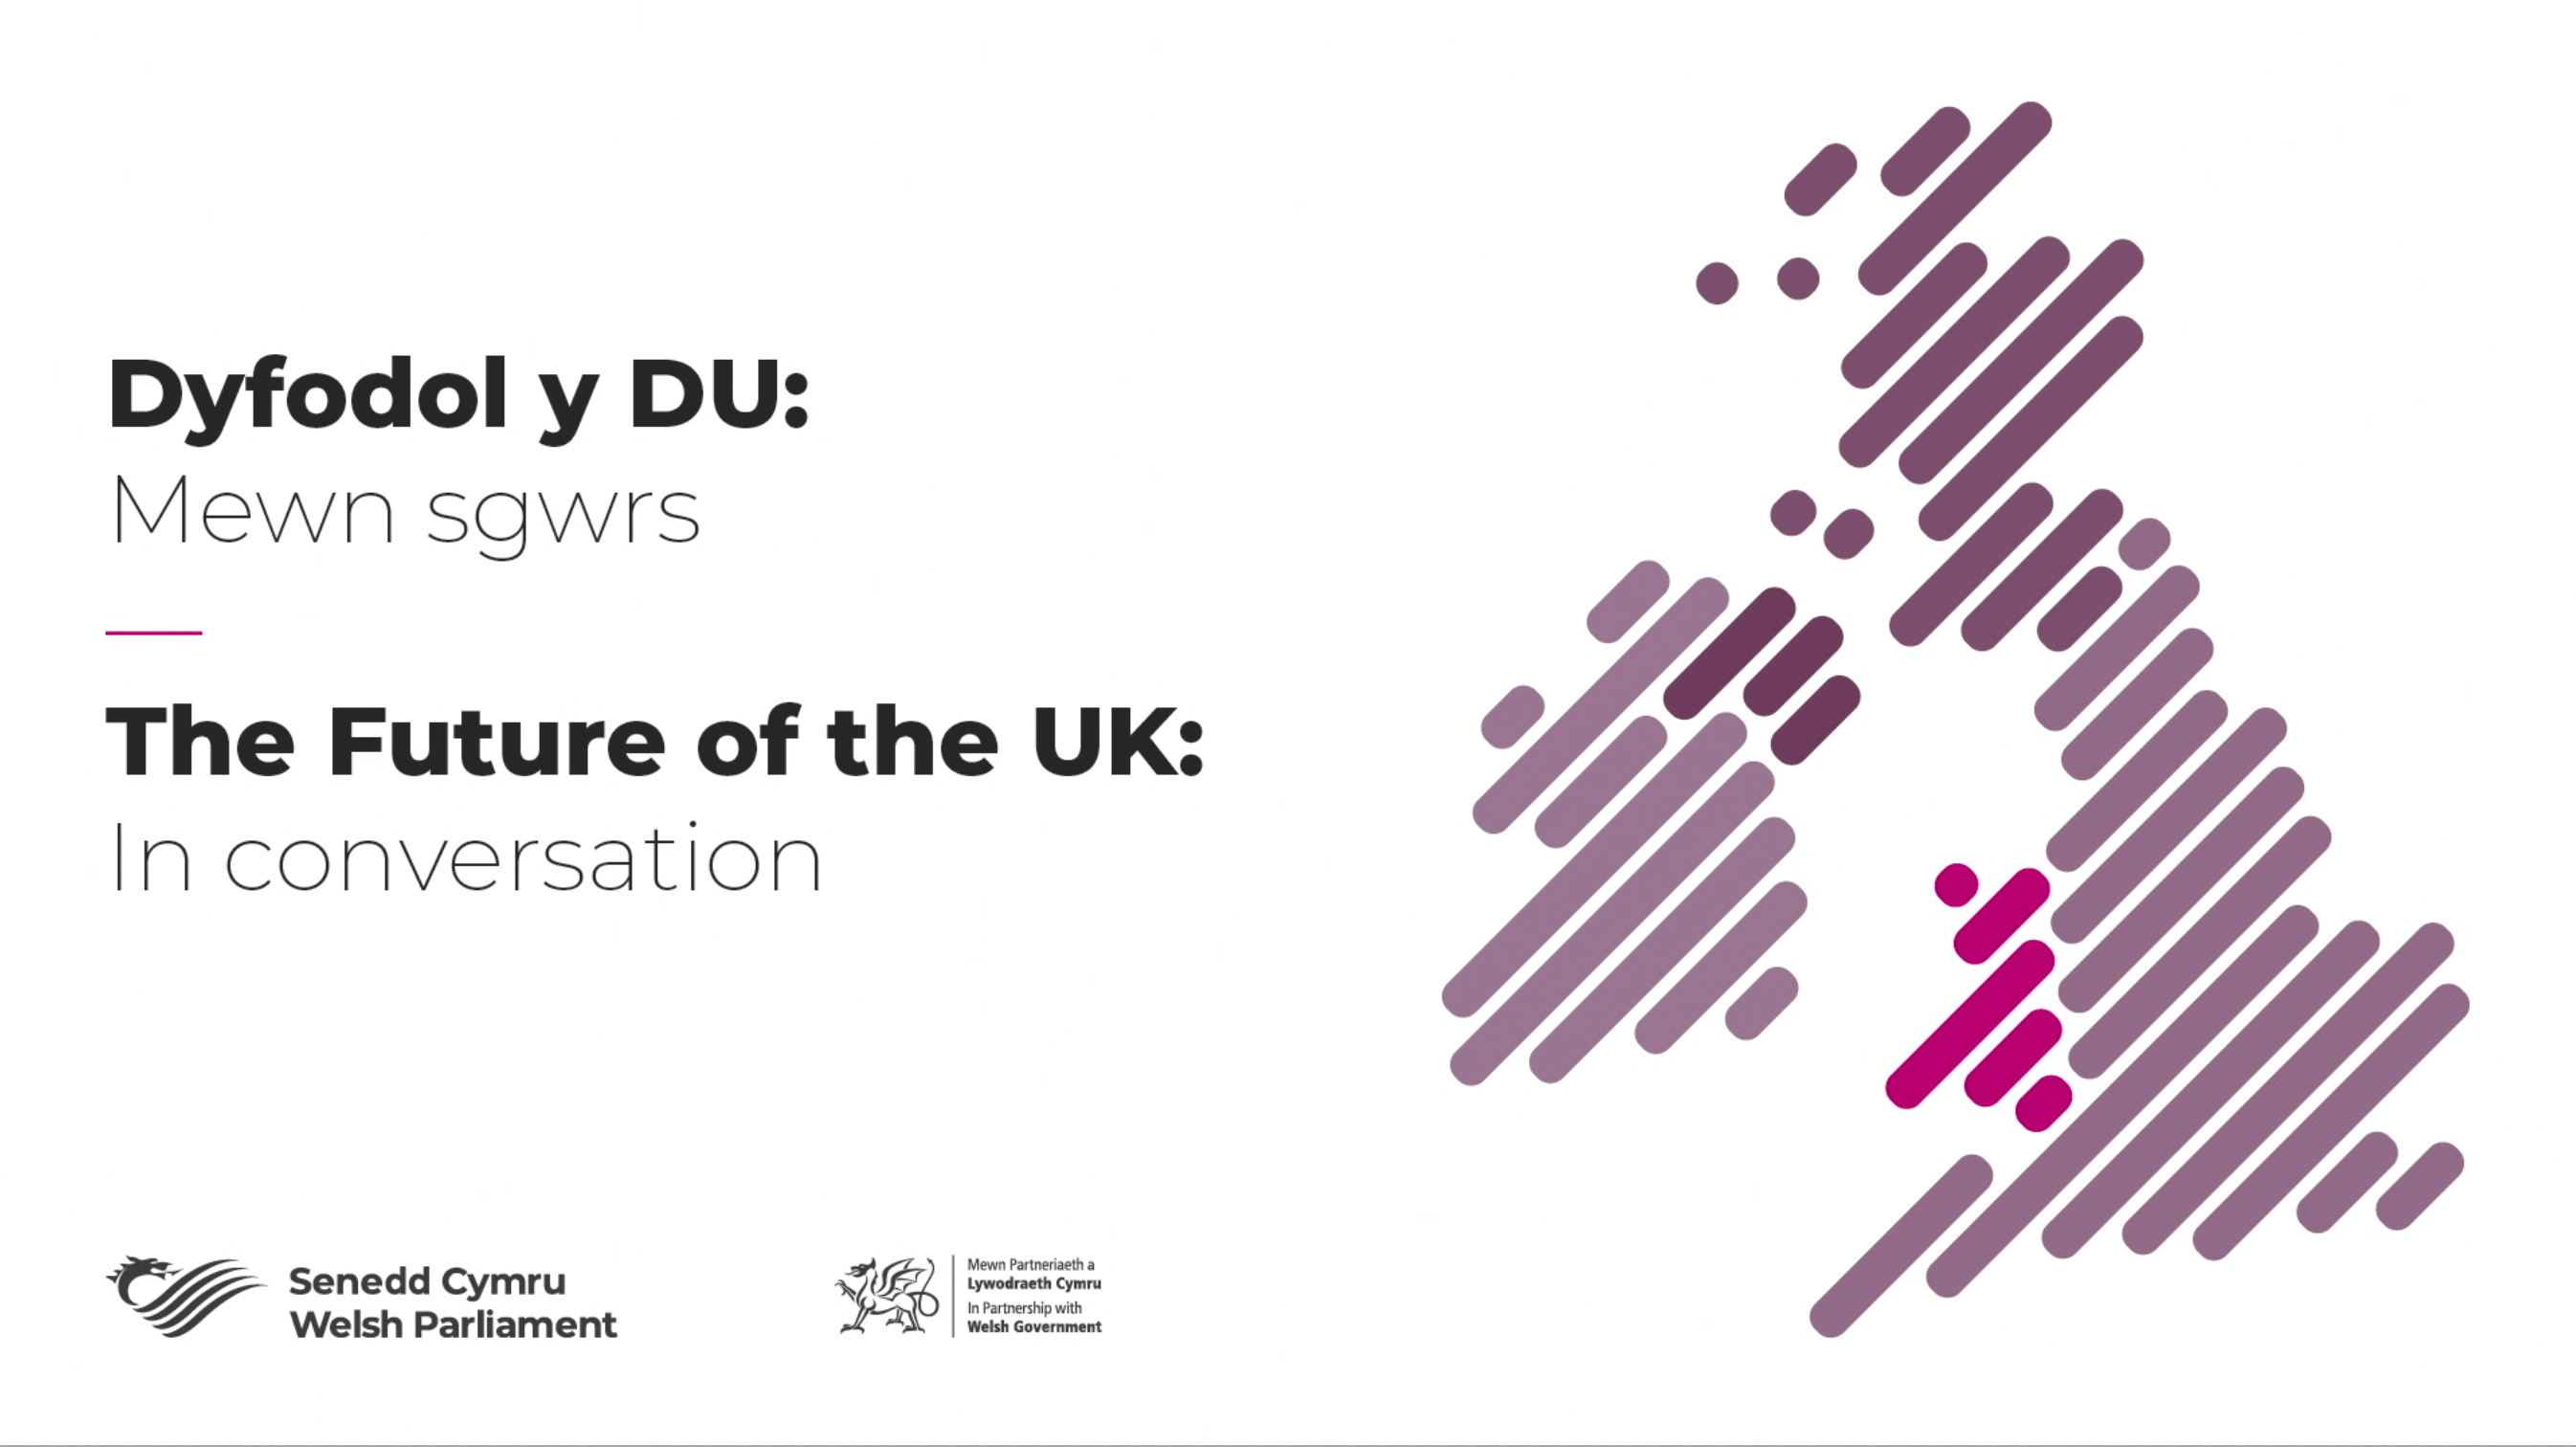 The Future of the UK: In Conversation